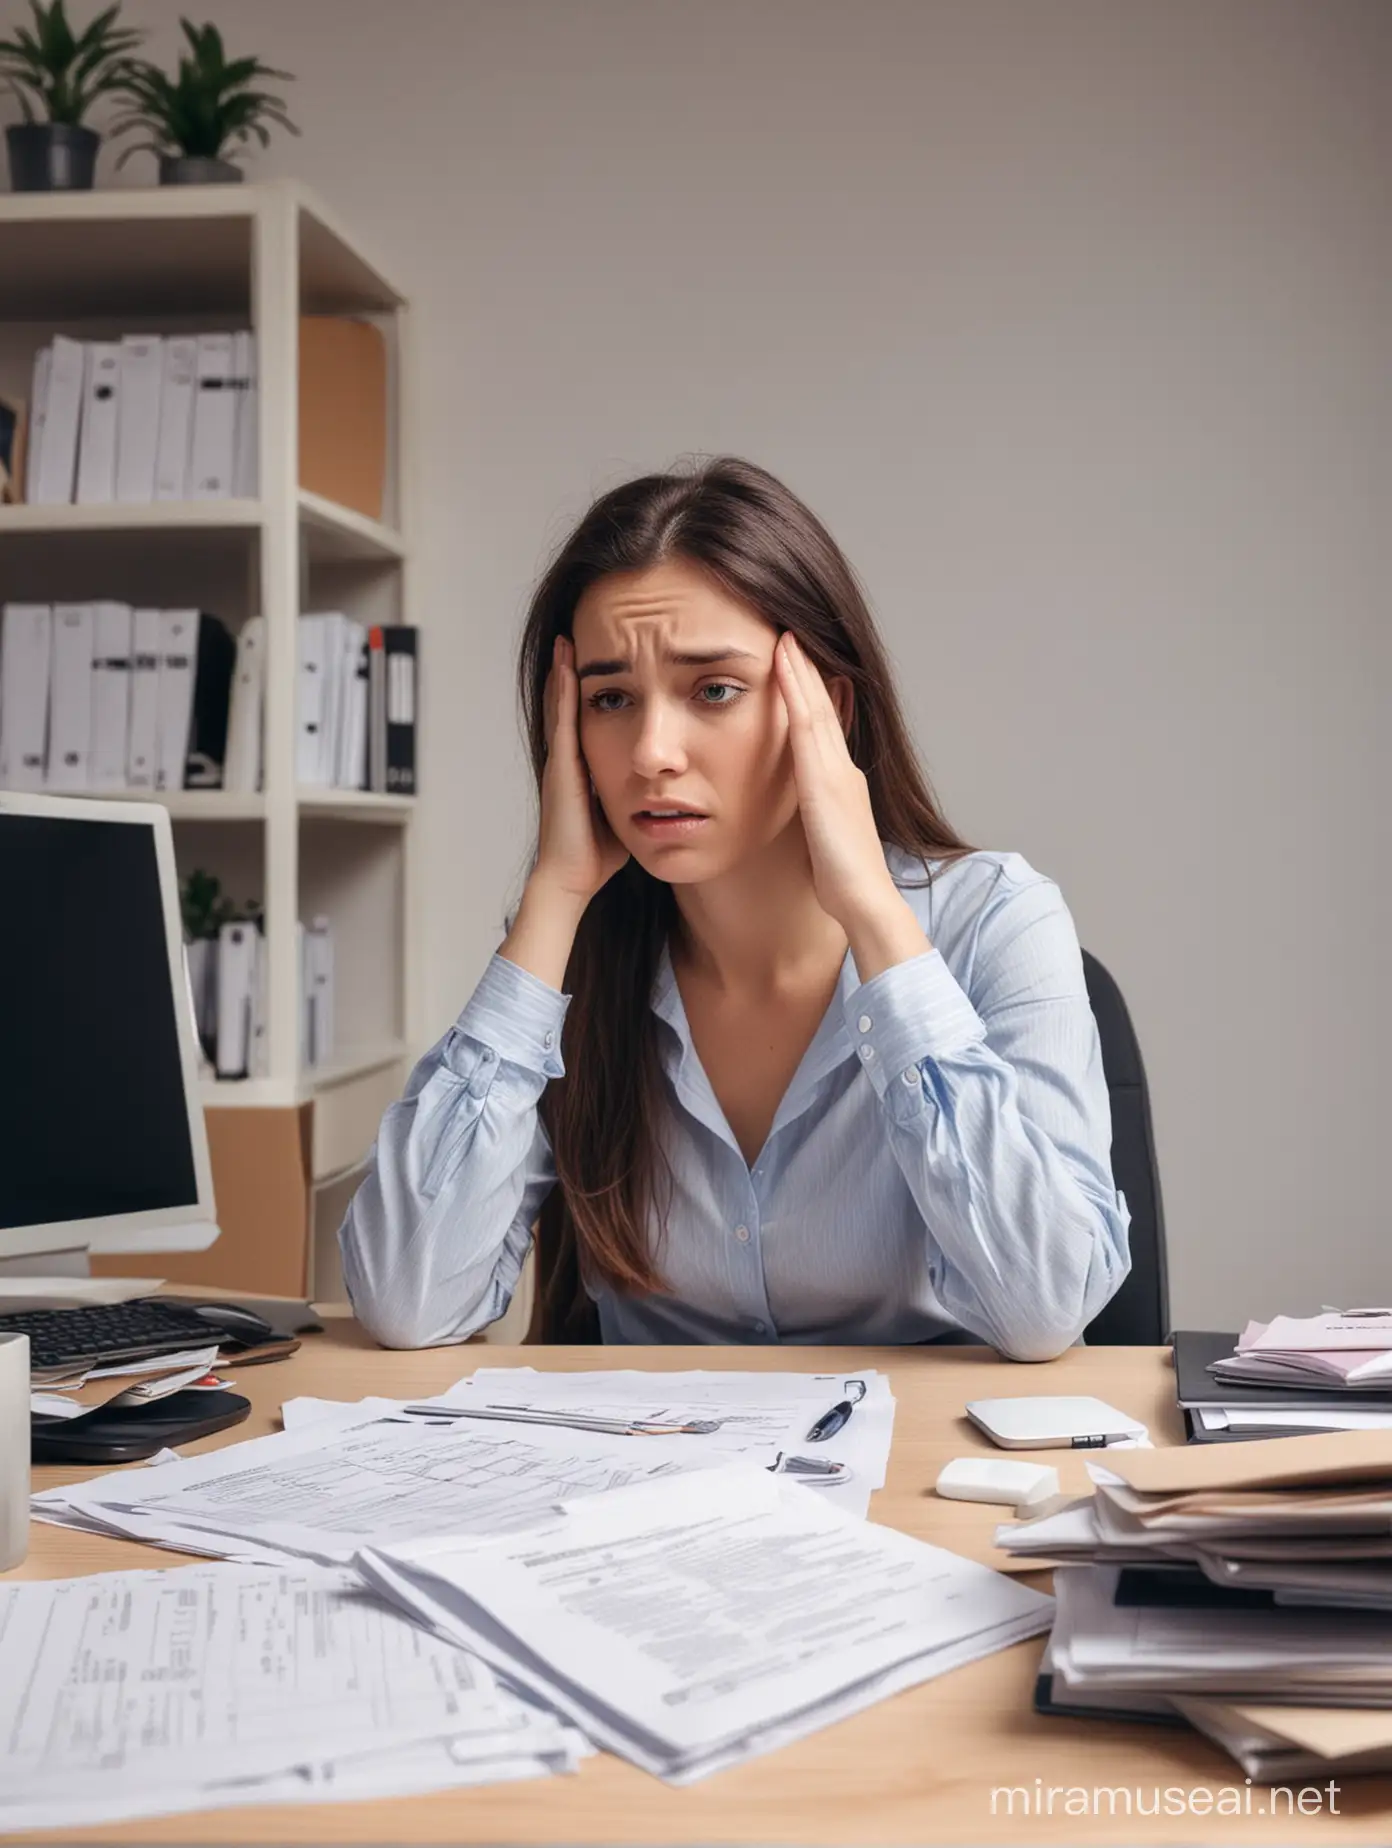 Young Woman Overwhelmed by Work Stress in Isolated Office Setting